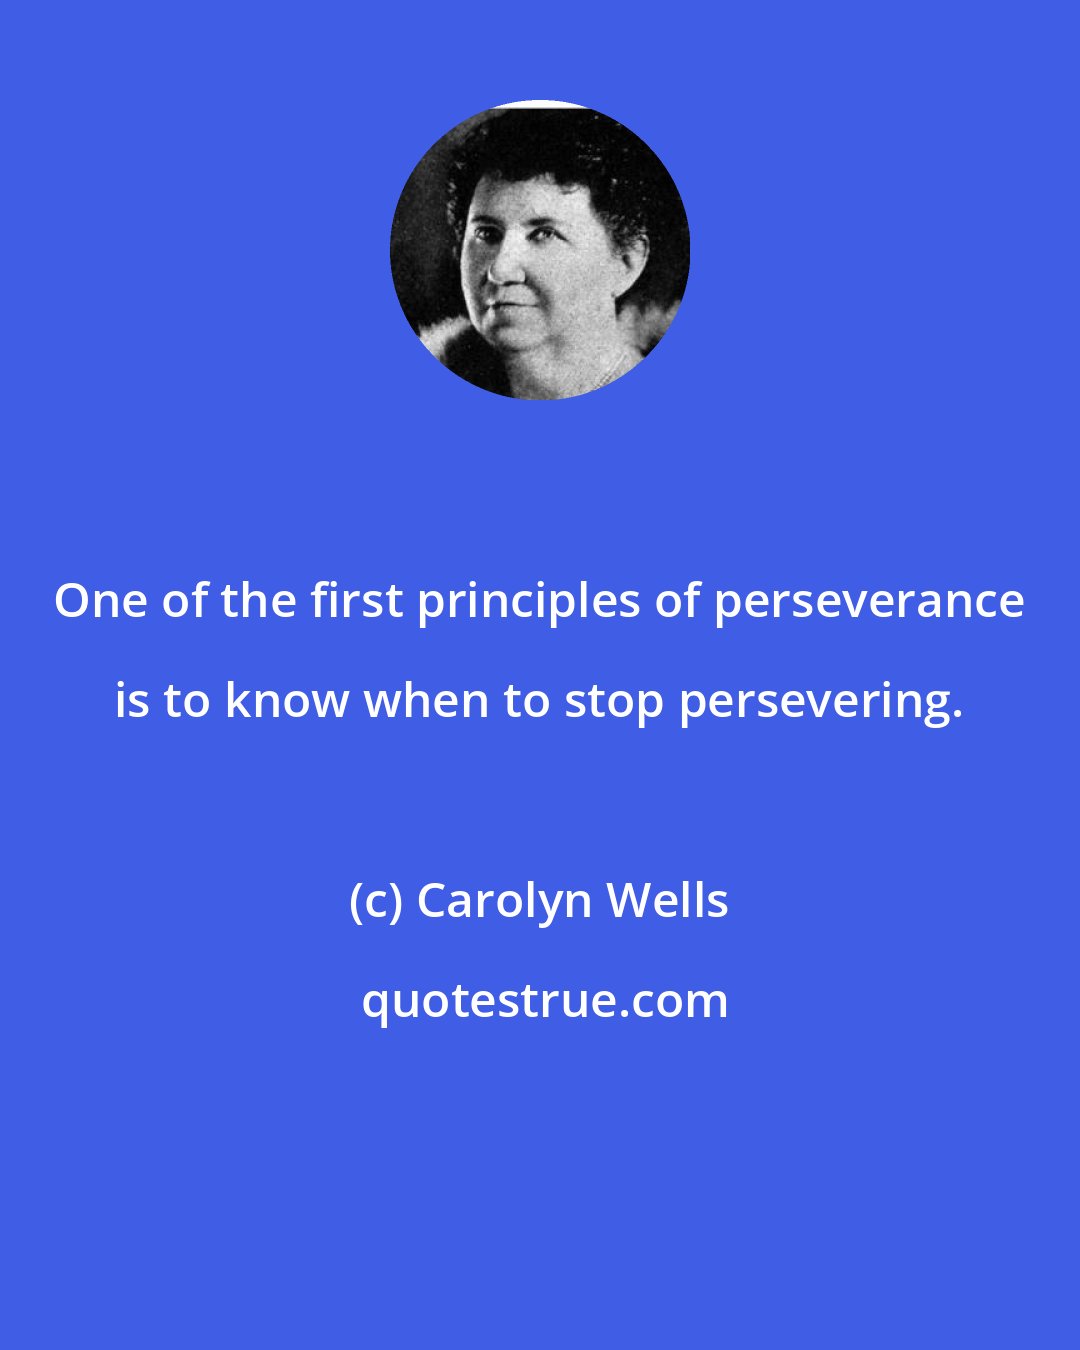 Carolyn Wells: One of the first principles of perseverance is to know when to stop persevering.